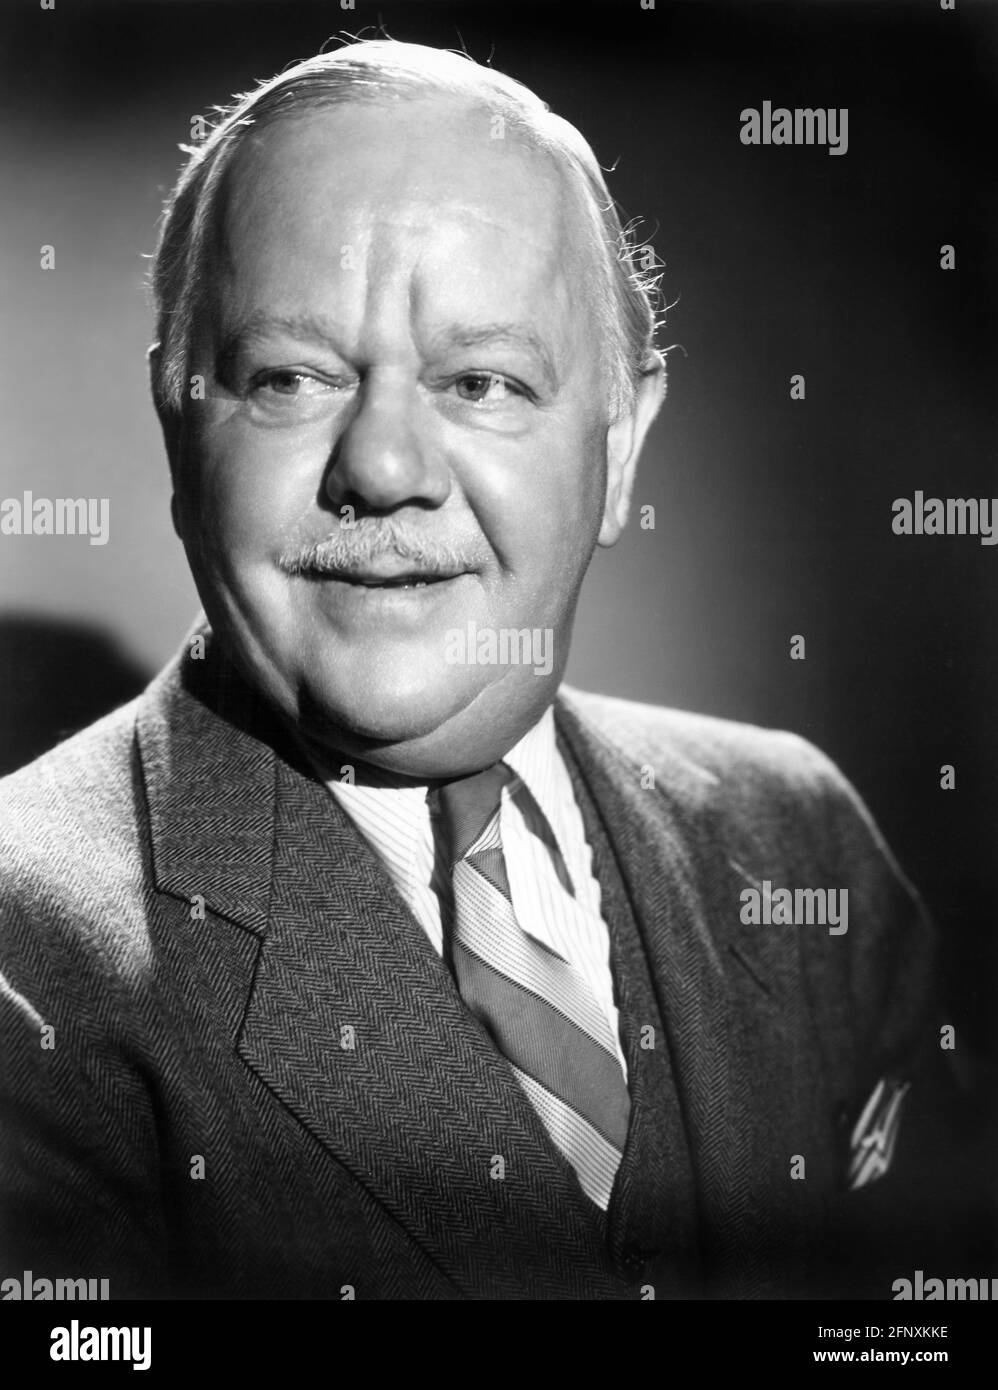 Charles Winninger, Head and Shoulders Publicity Portrait for the film, « Living in a Big Way », MGM, 1947 Banque D'Images